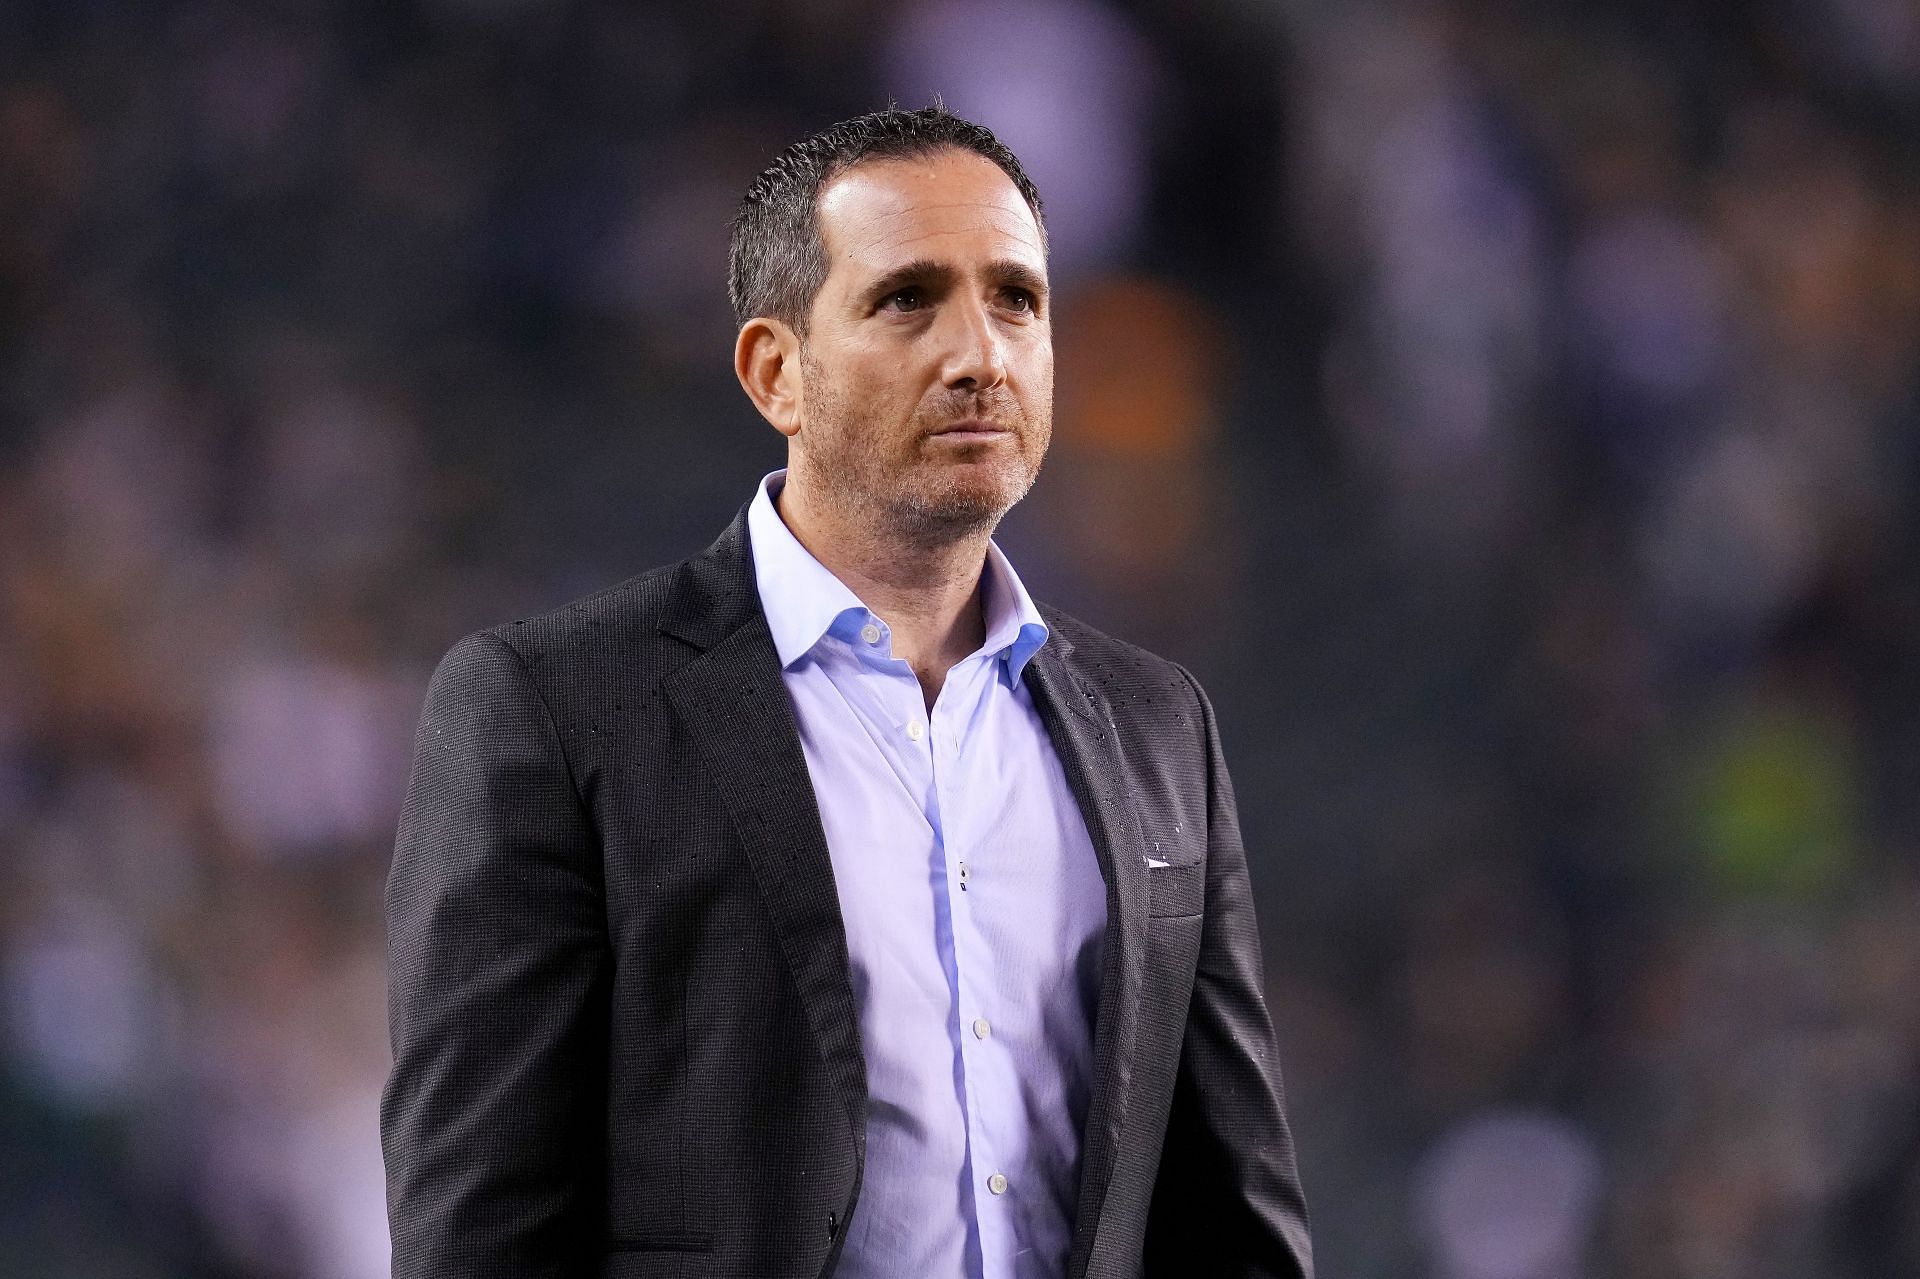 Could Howie Roseman draft Carter at pick 10?